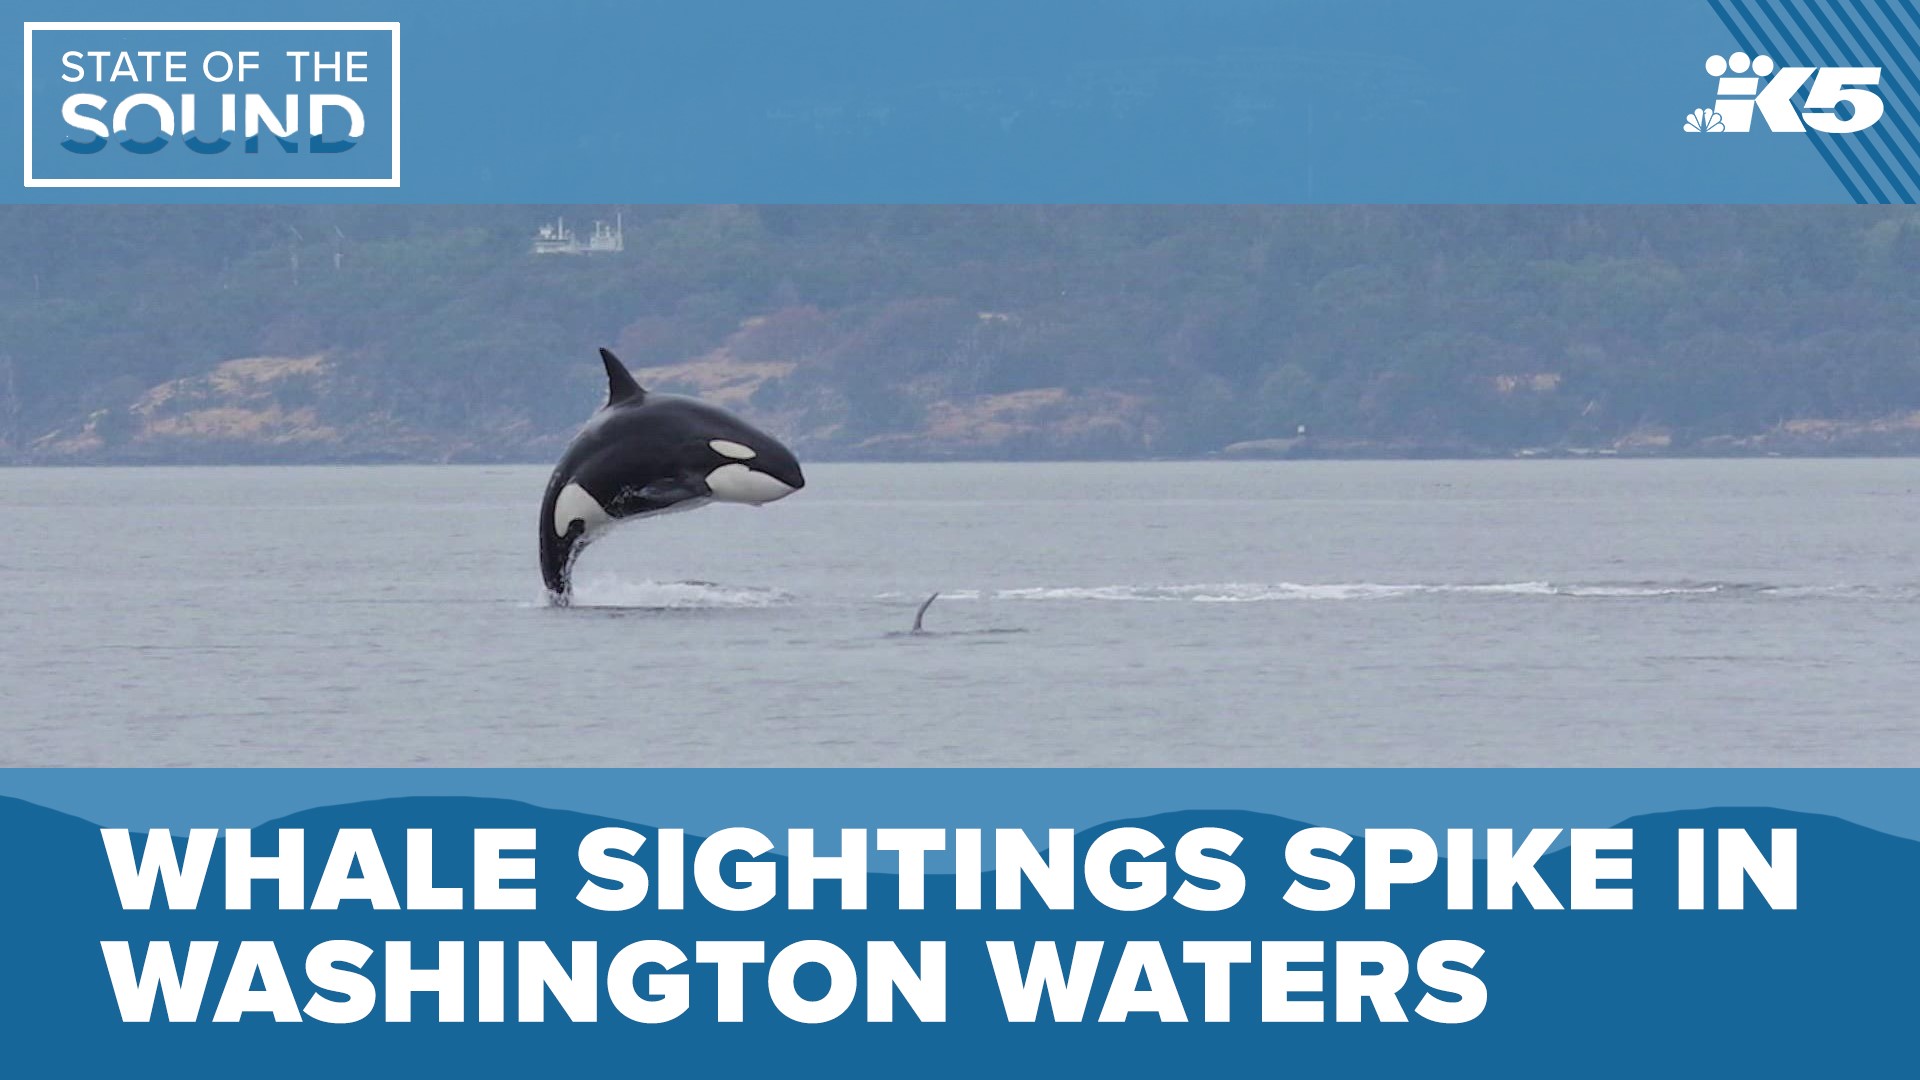 Whale sightings have increased over the past few years, but close encounters between the mammals and Puget Sound boaters are causing concern for environmentalists.